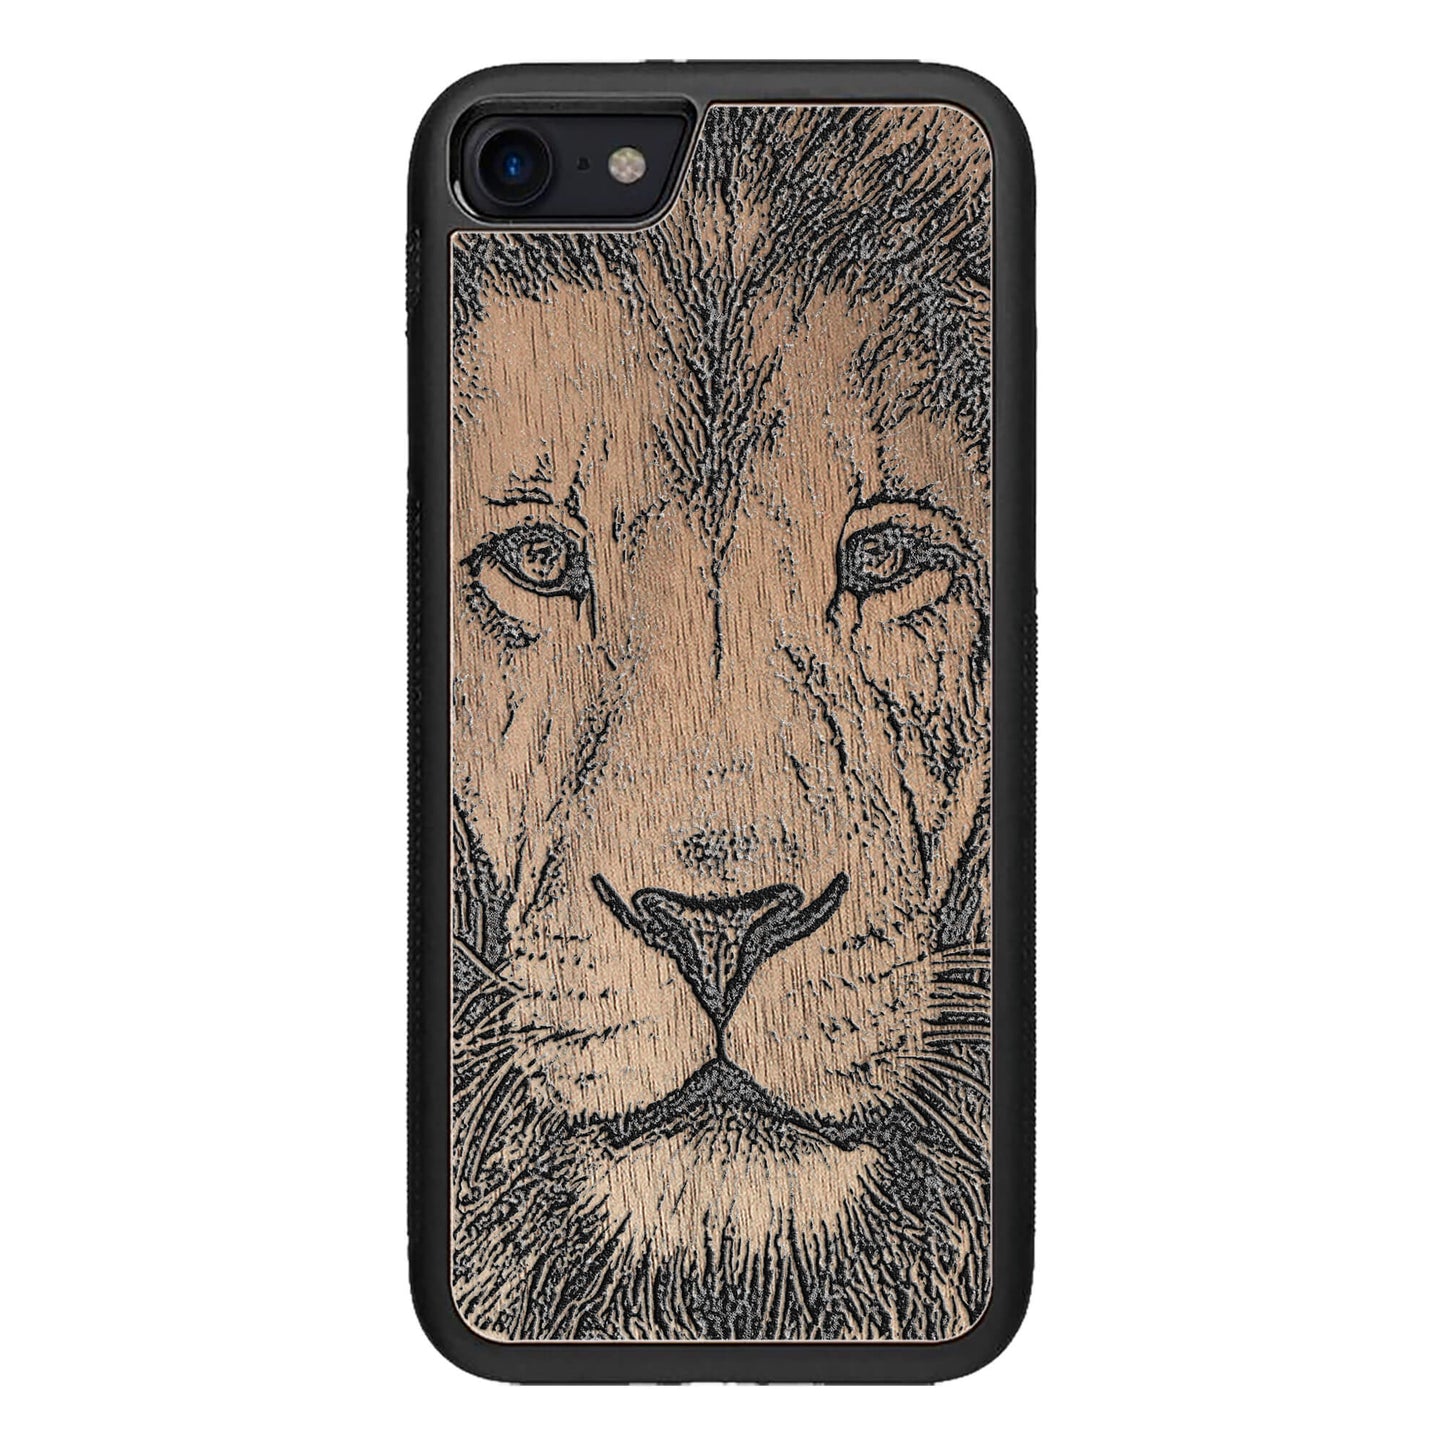 Wooden Case for iPhone 8 ﻿Lion face